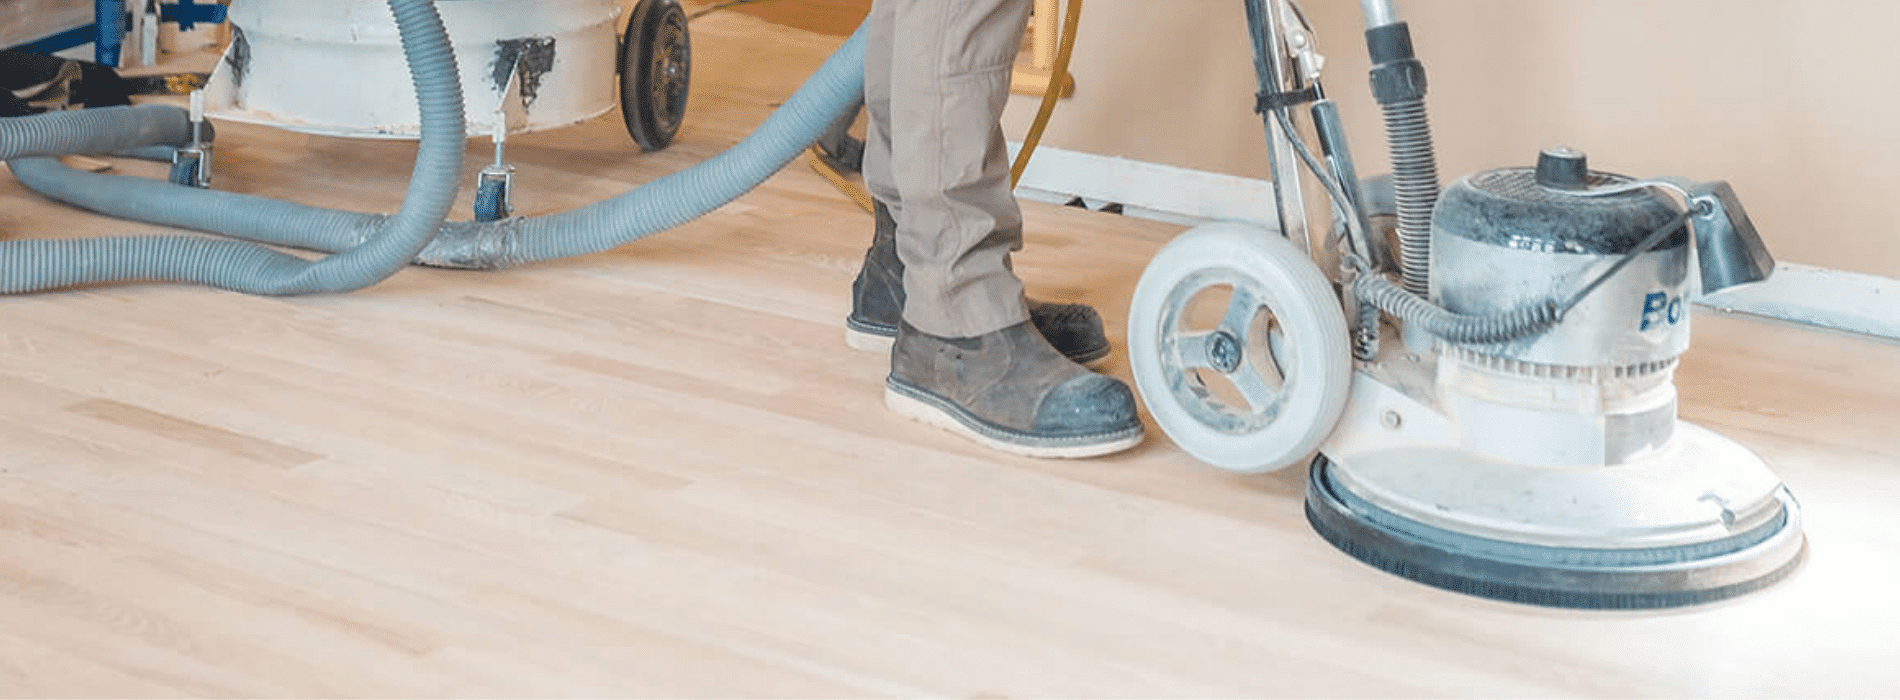 Mr Sander® in Billericay, CM11, restoring a parquet floor using a 2.2 kW, 230V, 50Hz Bona buffer sander. The sander is connected to a HEPA-filtered dust extraction system, ensuring a clean, efficient, and high-quality restoration process.